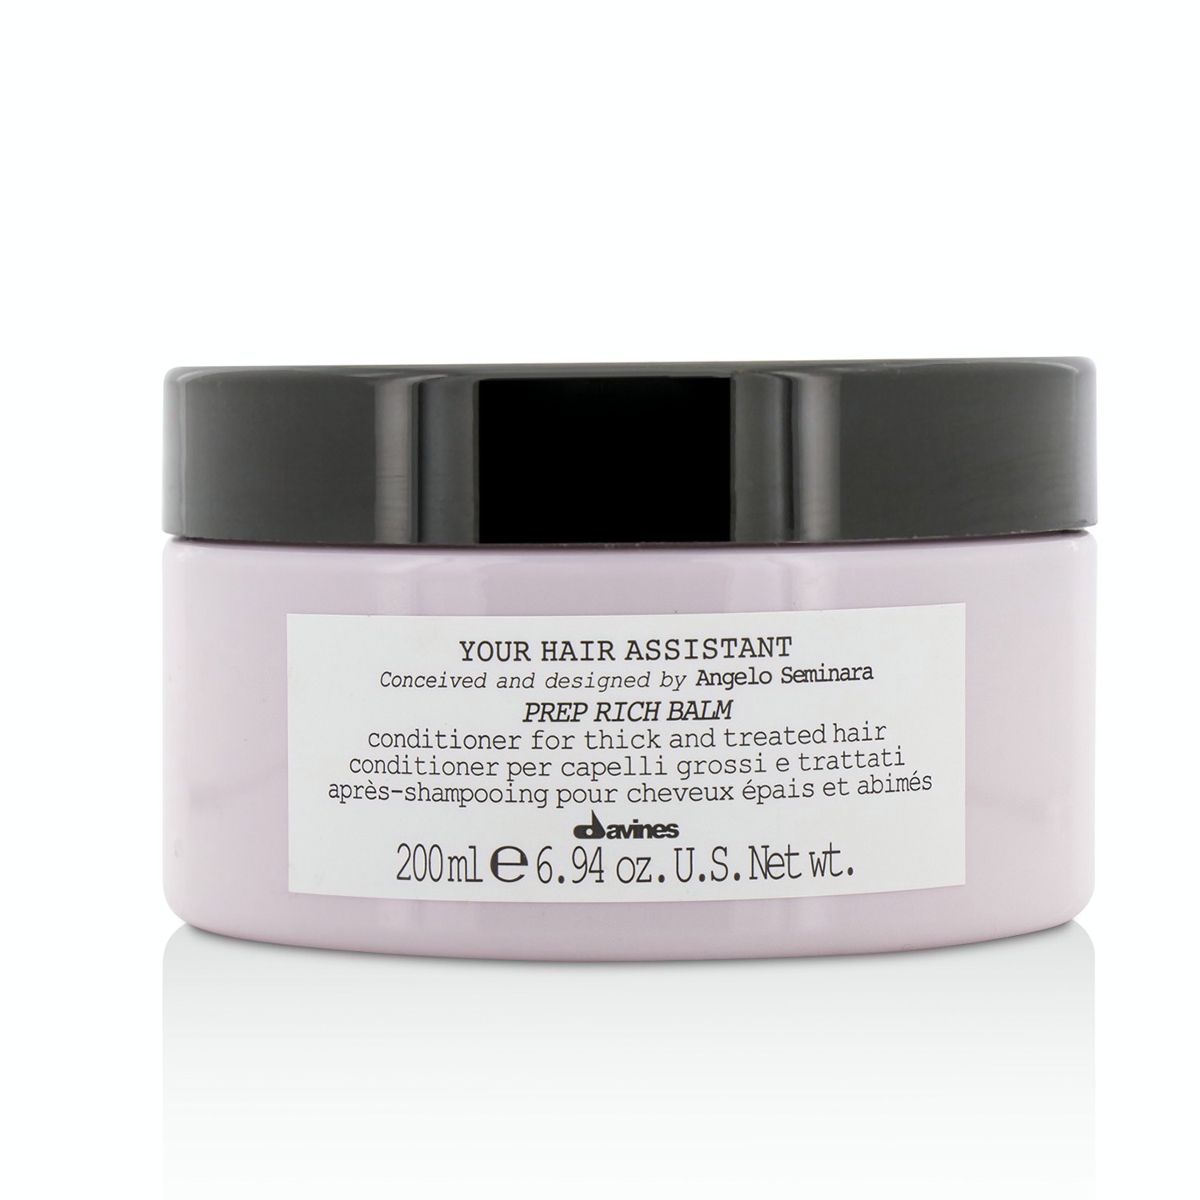 Your Hair Assistant Prep Rich Balm Conditioner (For Thick and Treated Hair) Davines Image